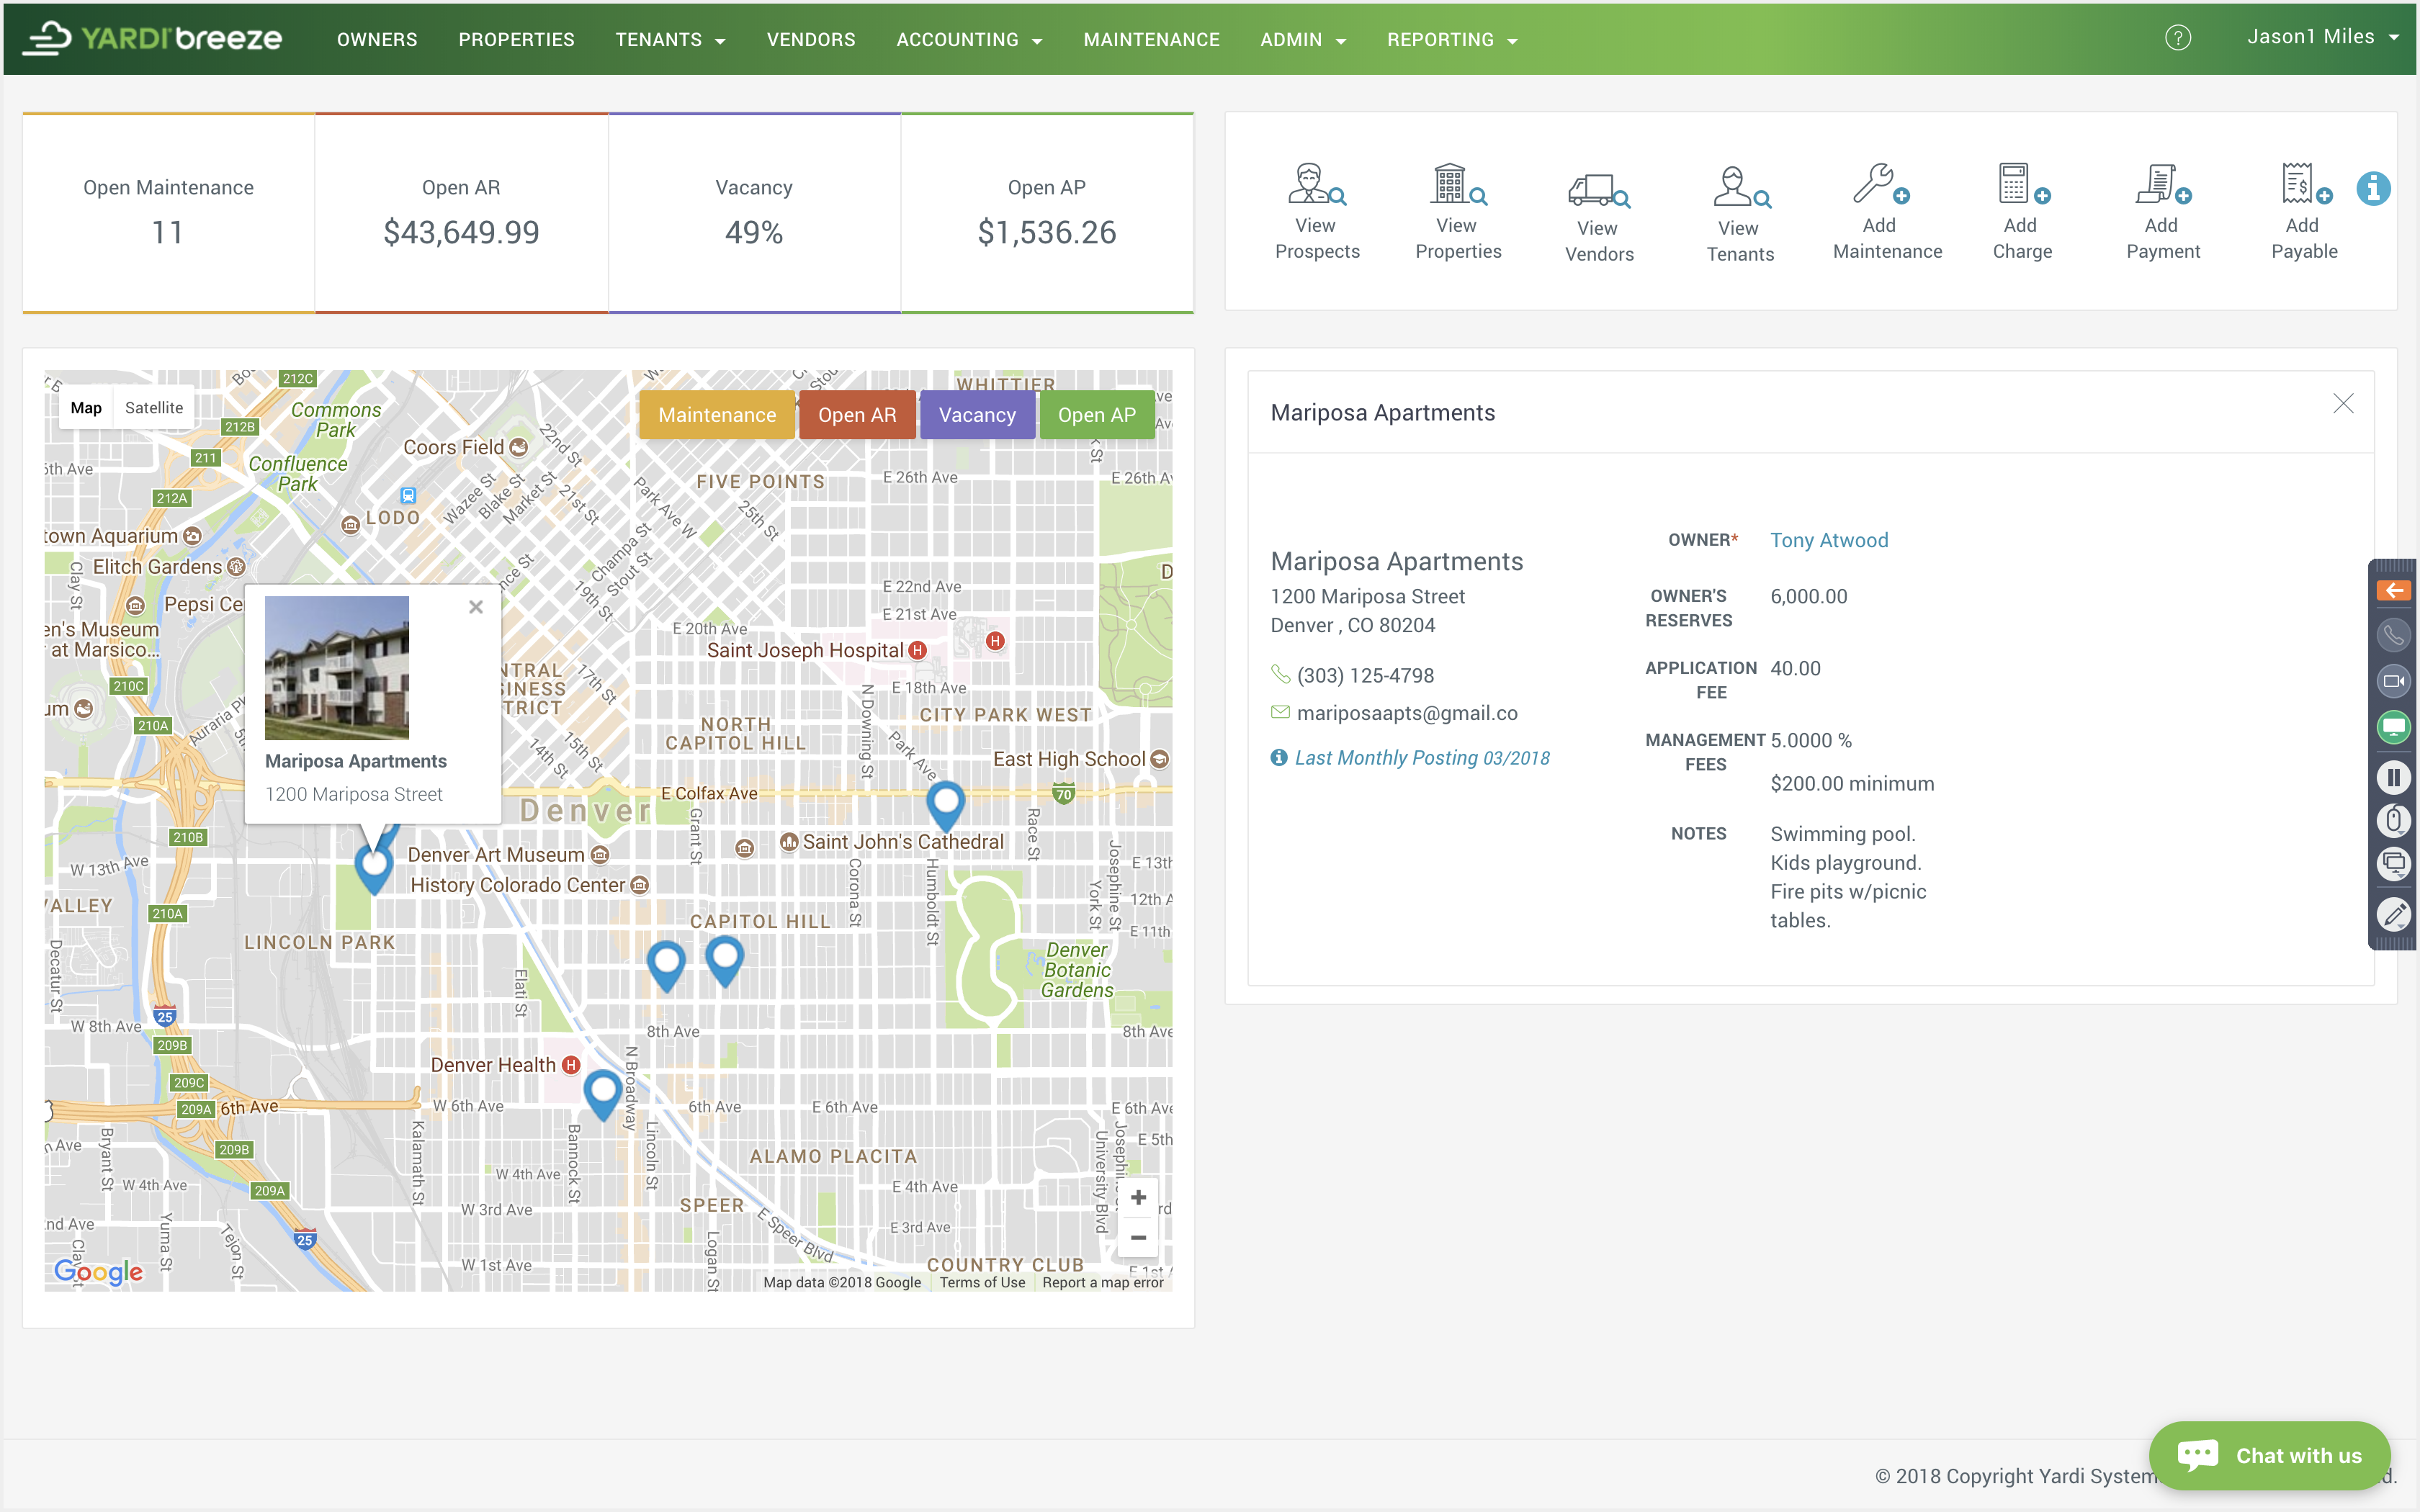 Use the Yardi Breeze dashboard as your hub for all operations, with tabs to drill down into owner, property, tenant, vendor, accounting, maintenance, administration and reporting data.